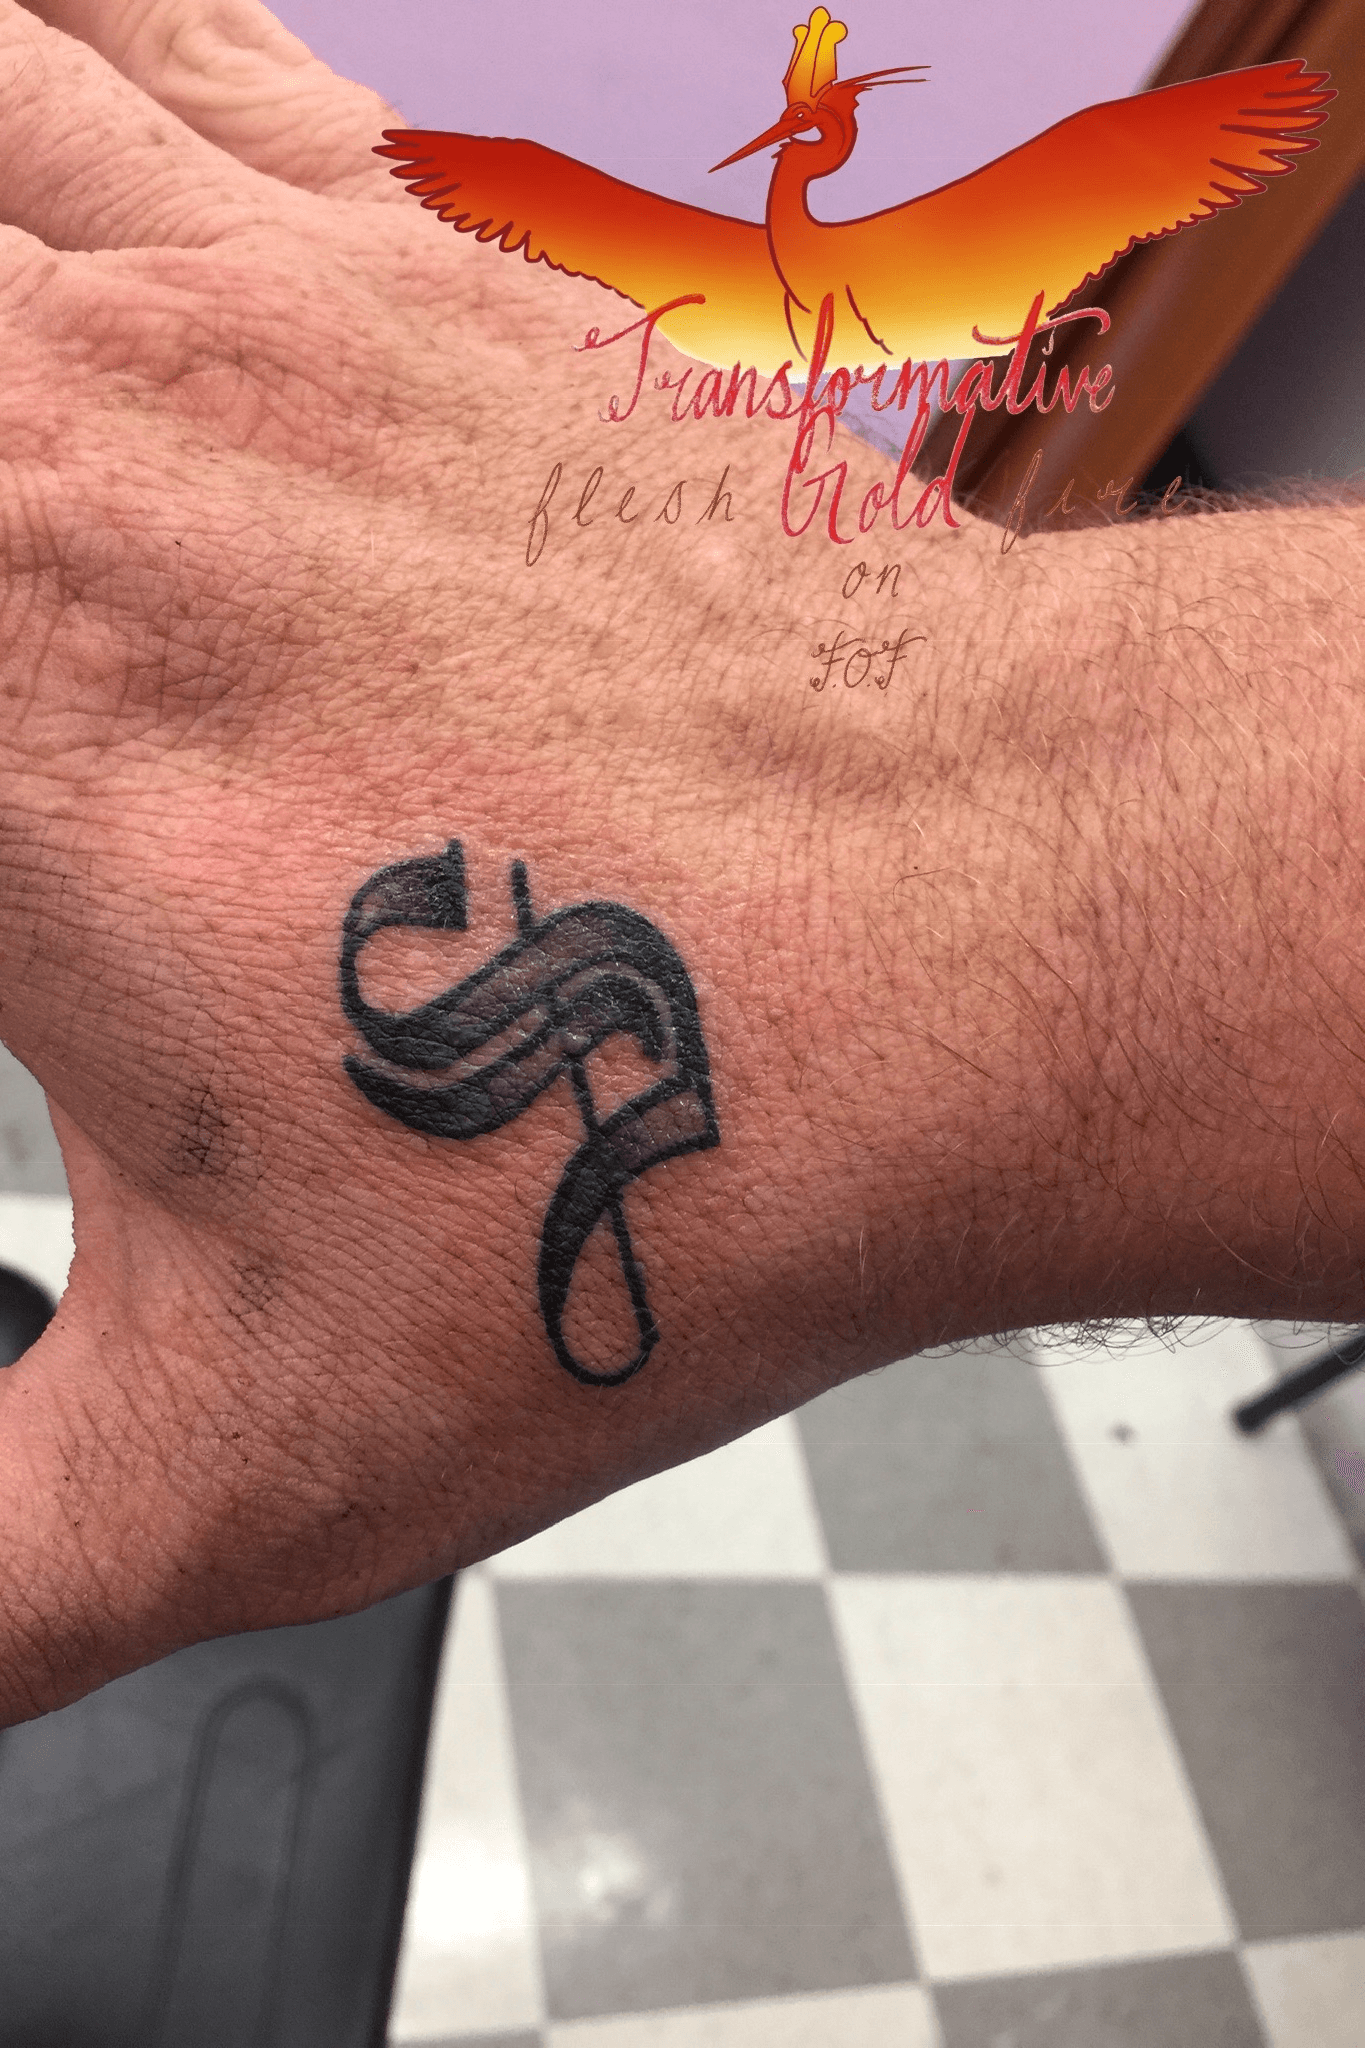 Buy Crowley Good Omens tattoo Mugcrowley tattoocrowley snakeGood Omens  mugserpent of garden of Online at Lowest Price in Ubuy India B081Y4ZZPF